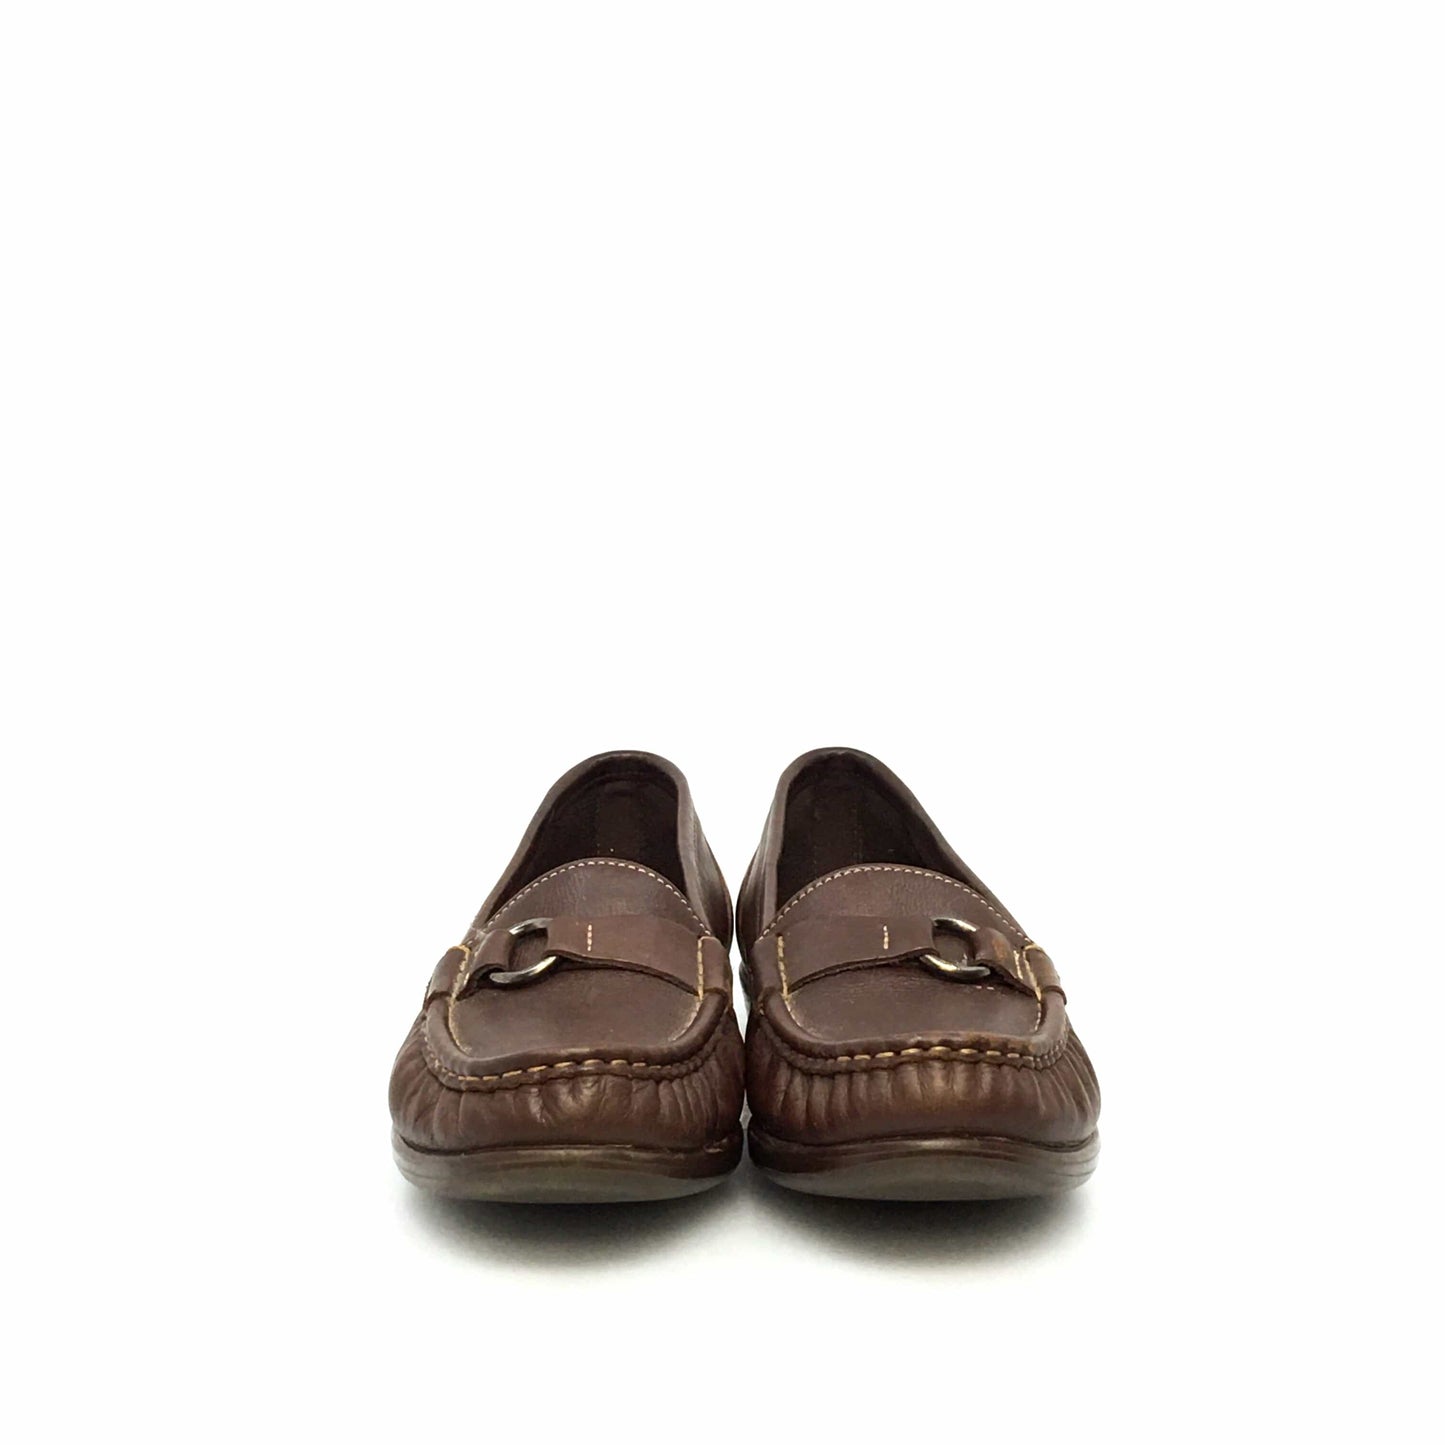 SAS Womens Size 8M Brown Leather Loafers Shoes Tripad Comfort Walking